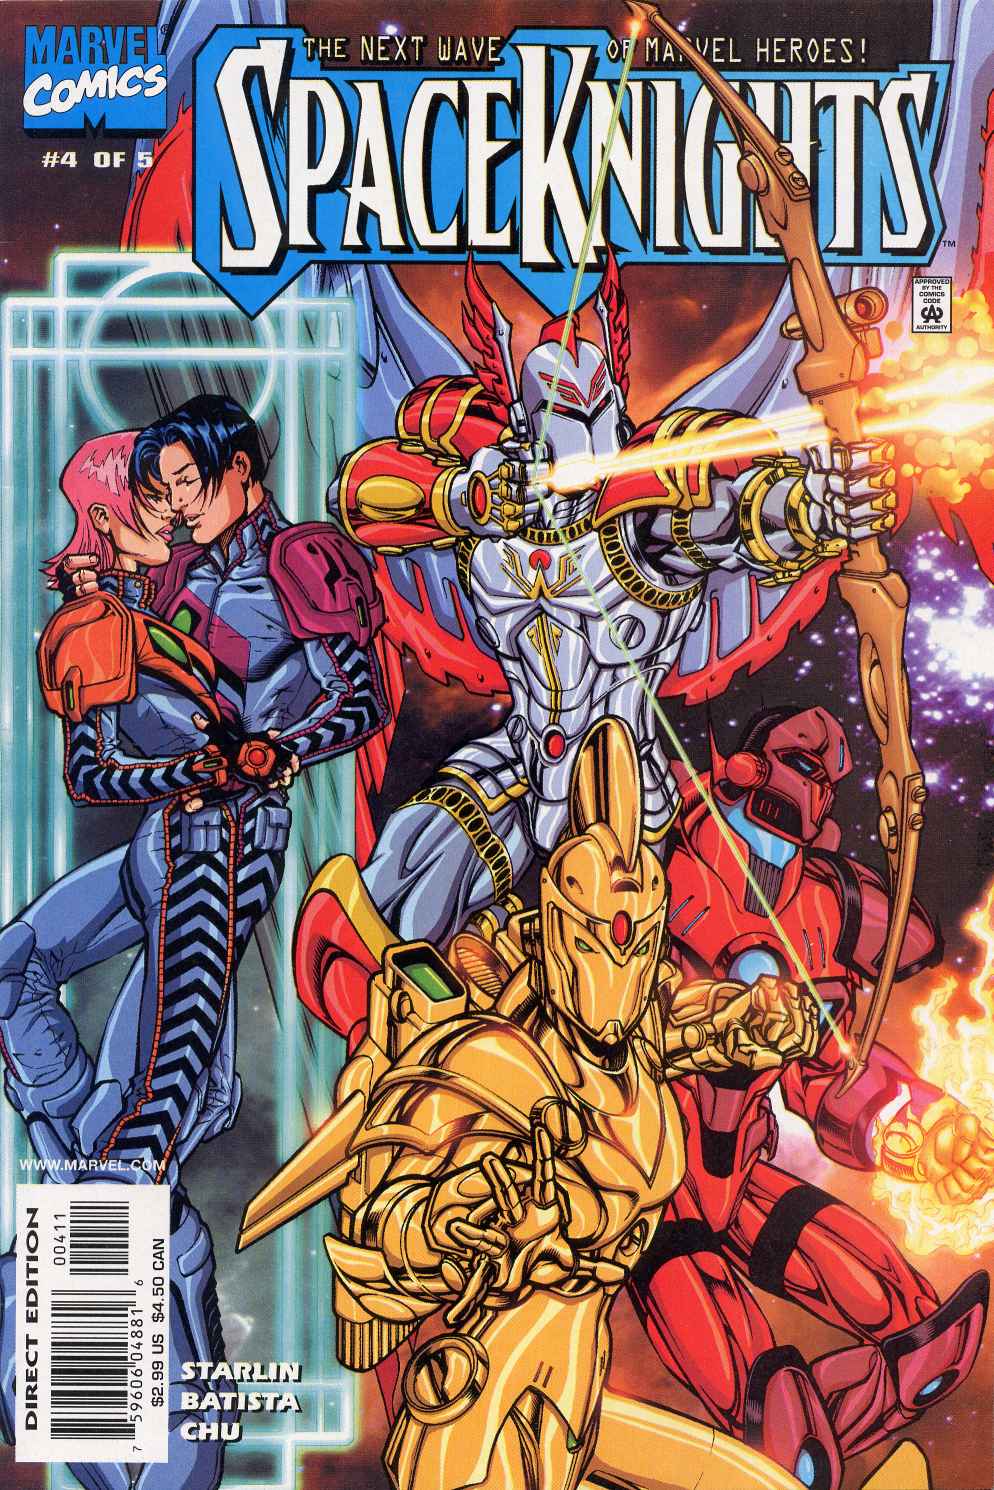 Read online Spaceknights (2000) comic -  Issue #4 - 1